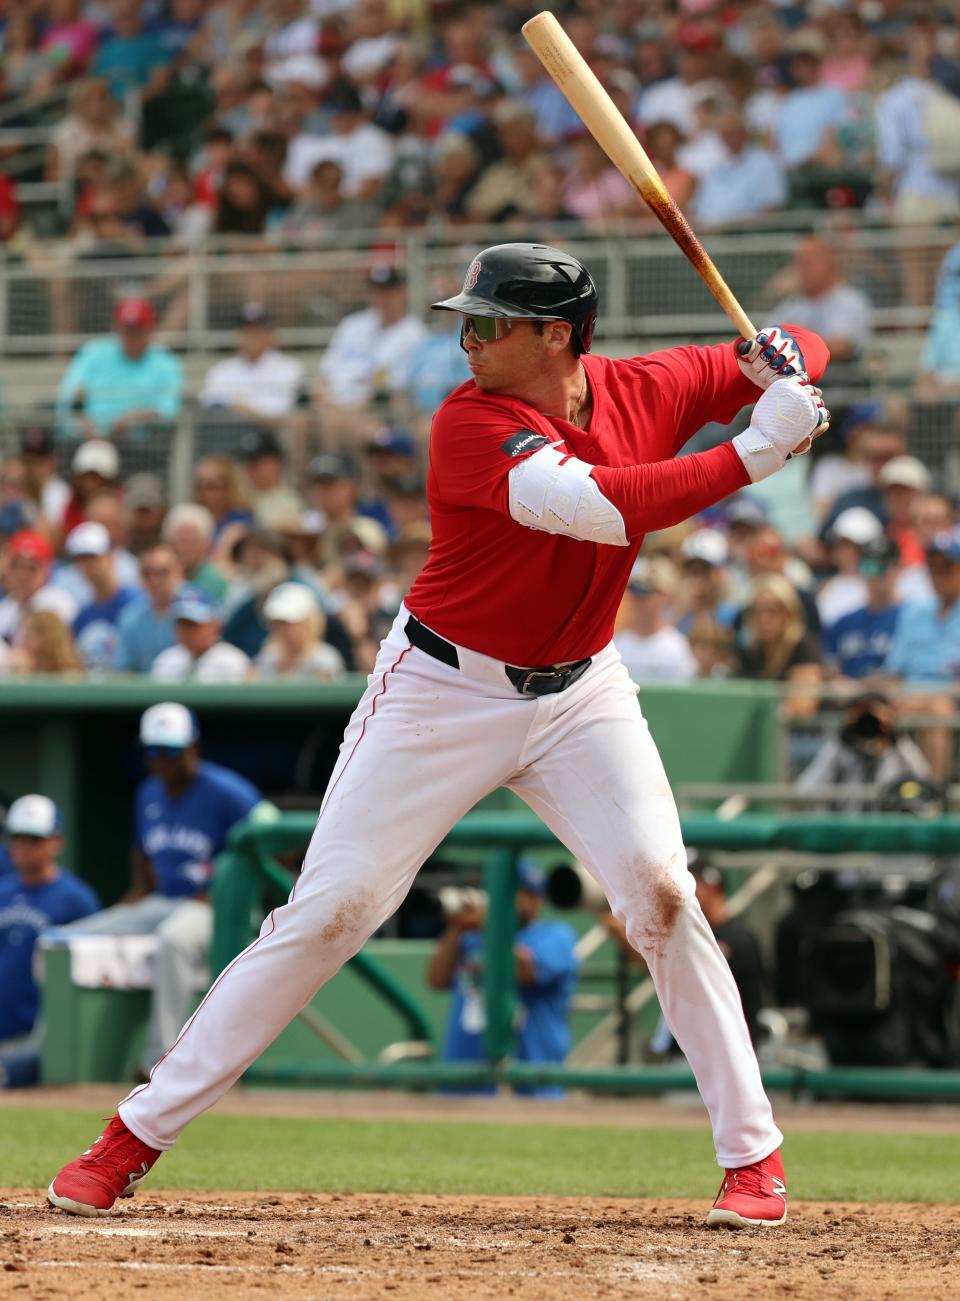 Red Sox first baseman Triston Casas bats during the game against the Toronto Blue Jays at JetBlue Park on March 3. Casas finished with a .263 average, 24 home runs, 65 RBI and a .856 OPS last season and was third in A.L. Rookie of the Year voting.